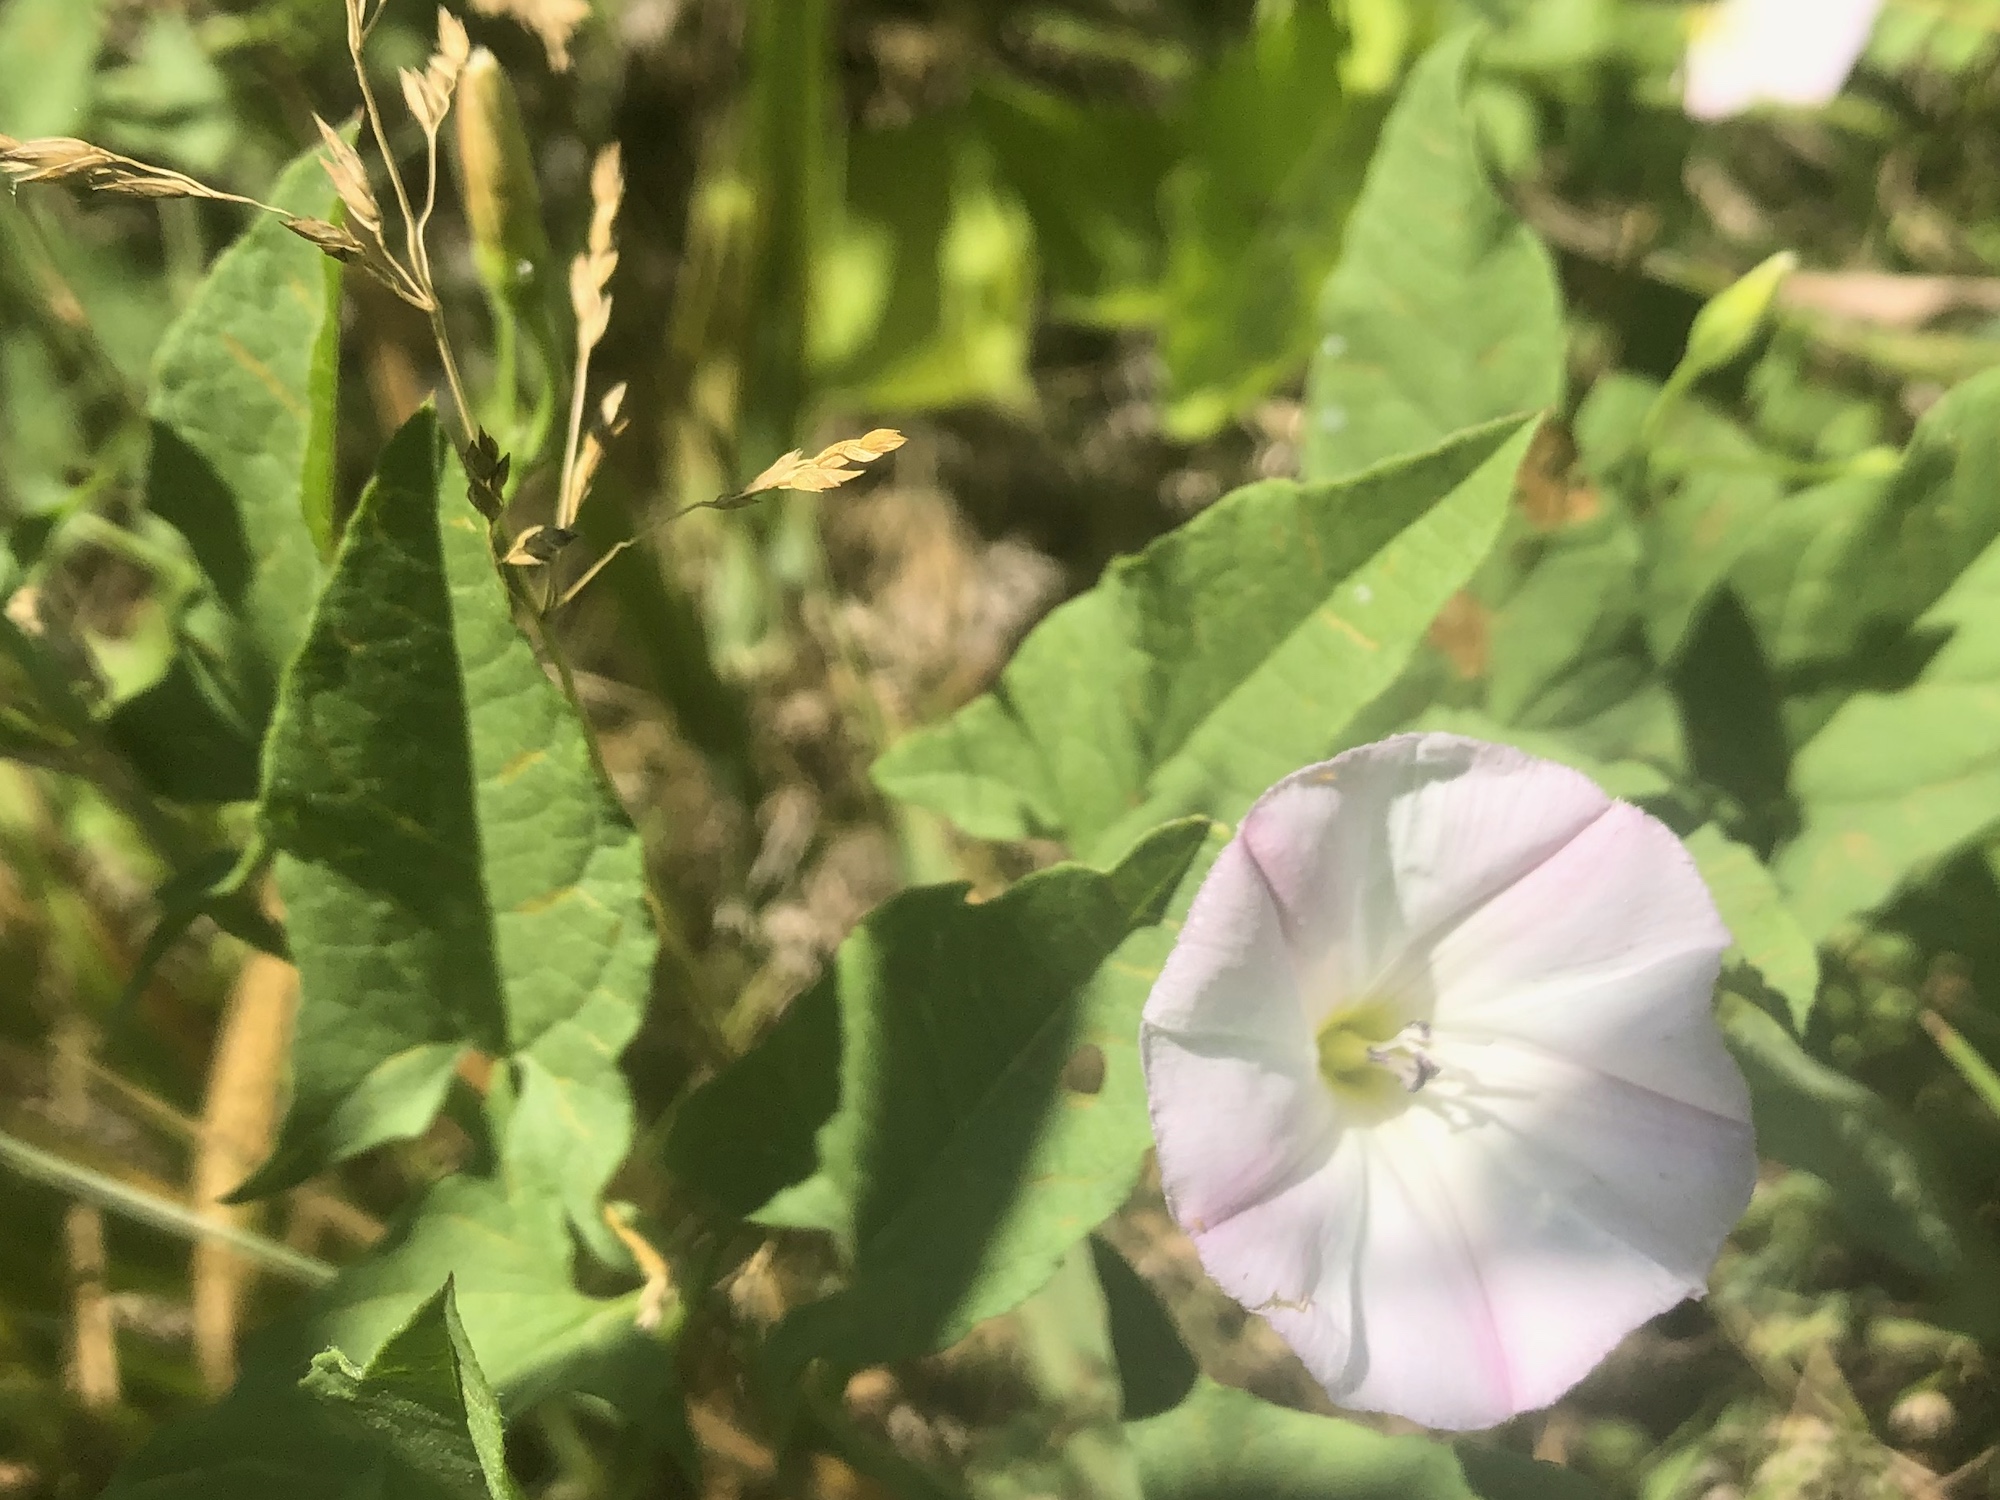 Field Bindweed on shore of Marion Dunn Pond in Madison, Wisconsin on June 14, 2021.